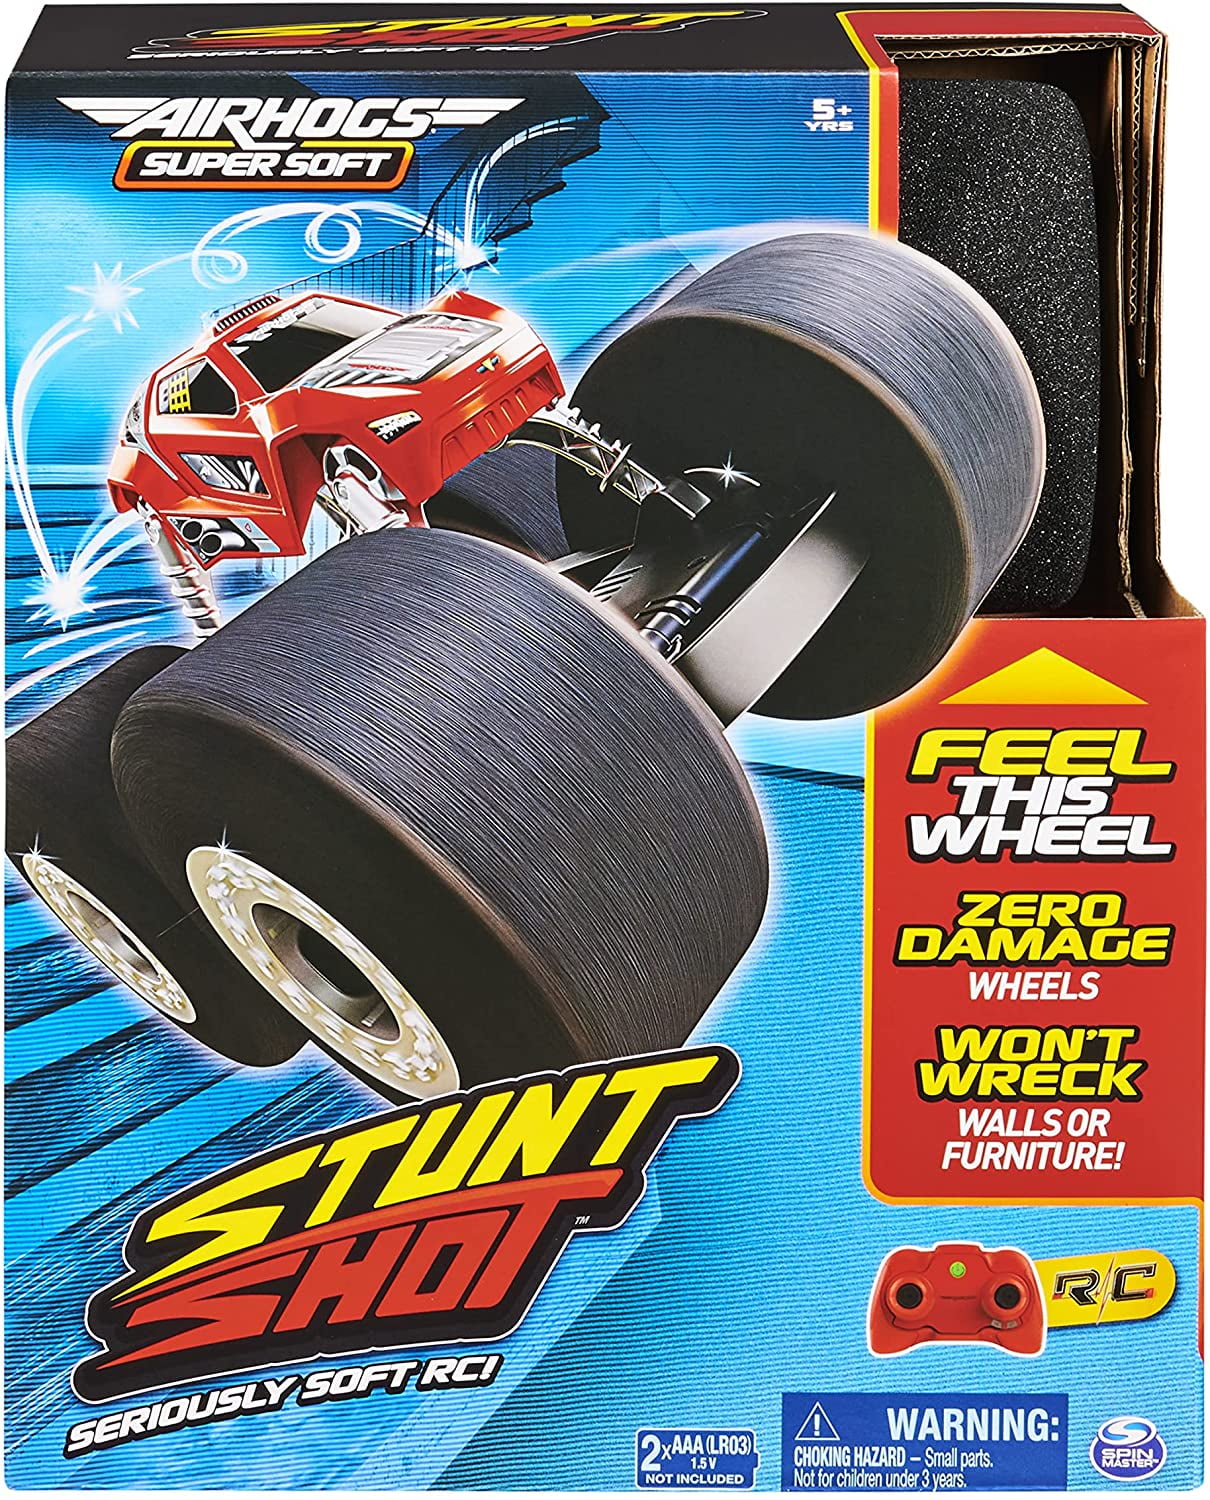 Air Hogs Super Soft Toys Stunt Shot Indoor Remote Control Car with Soft Wheels 